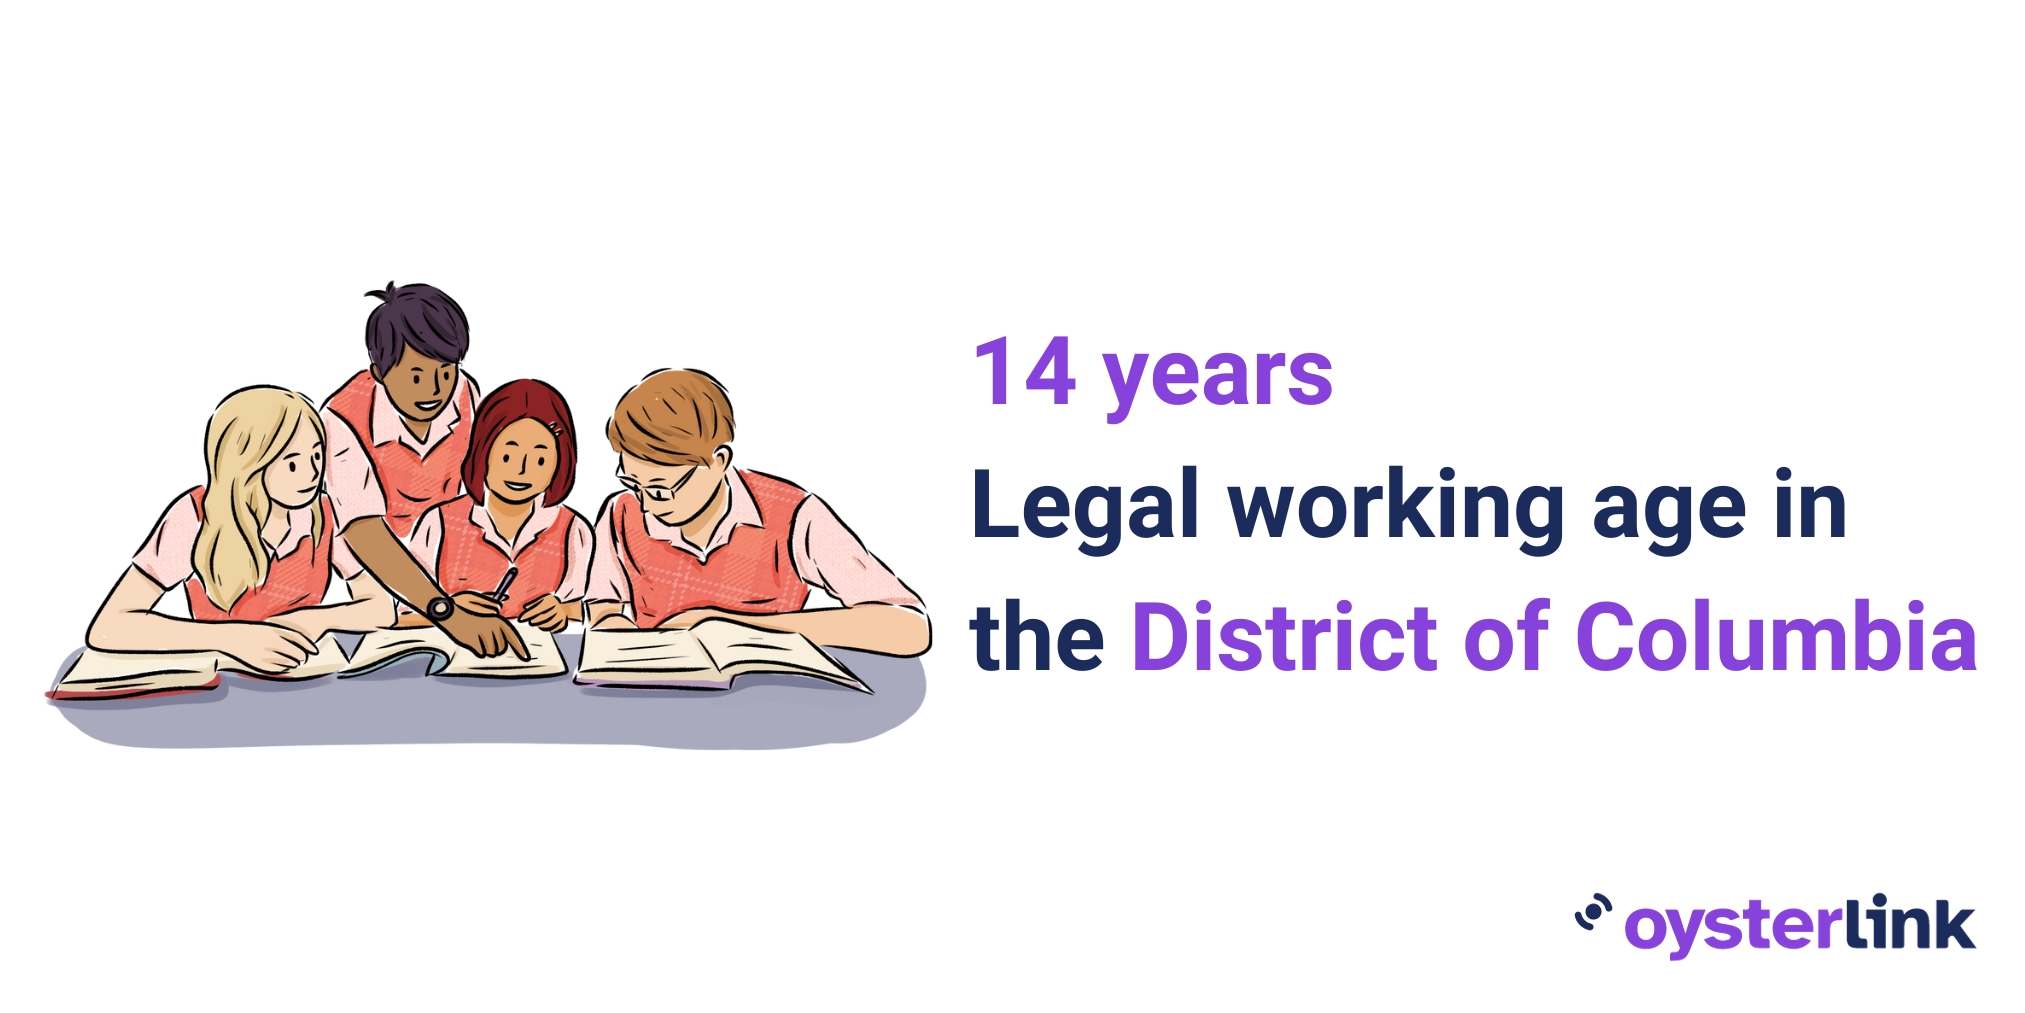 14 years of age is the legal working age in Washington D.C.